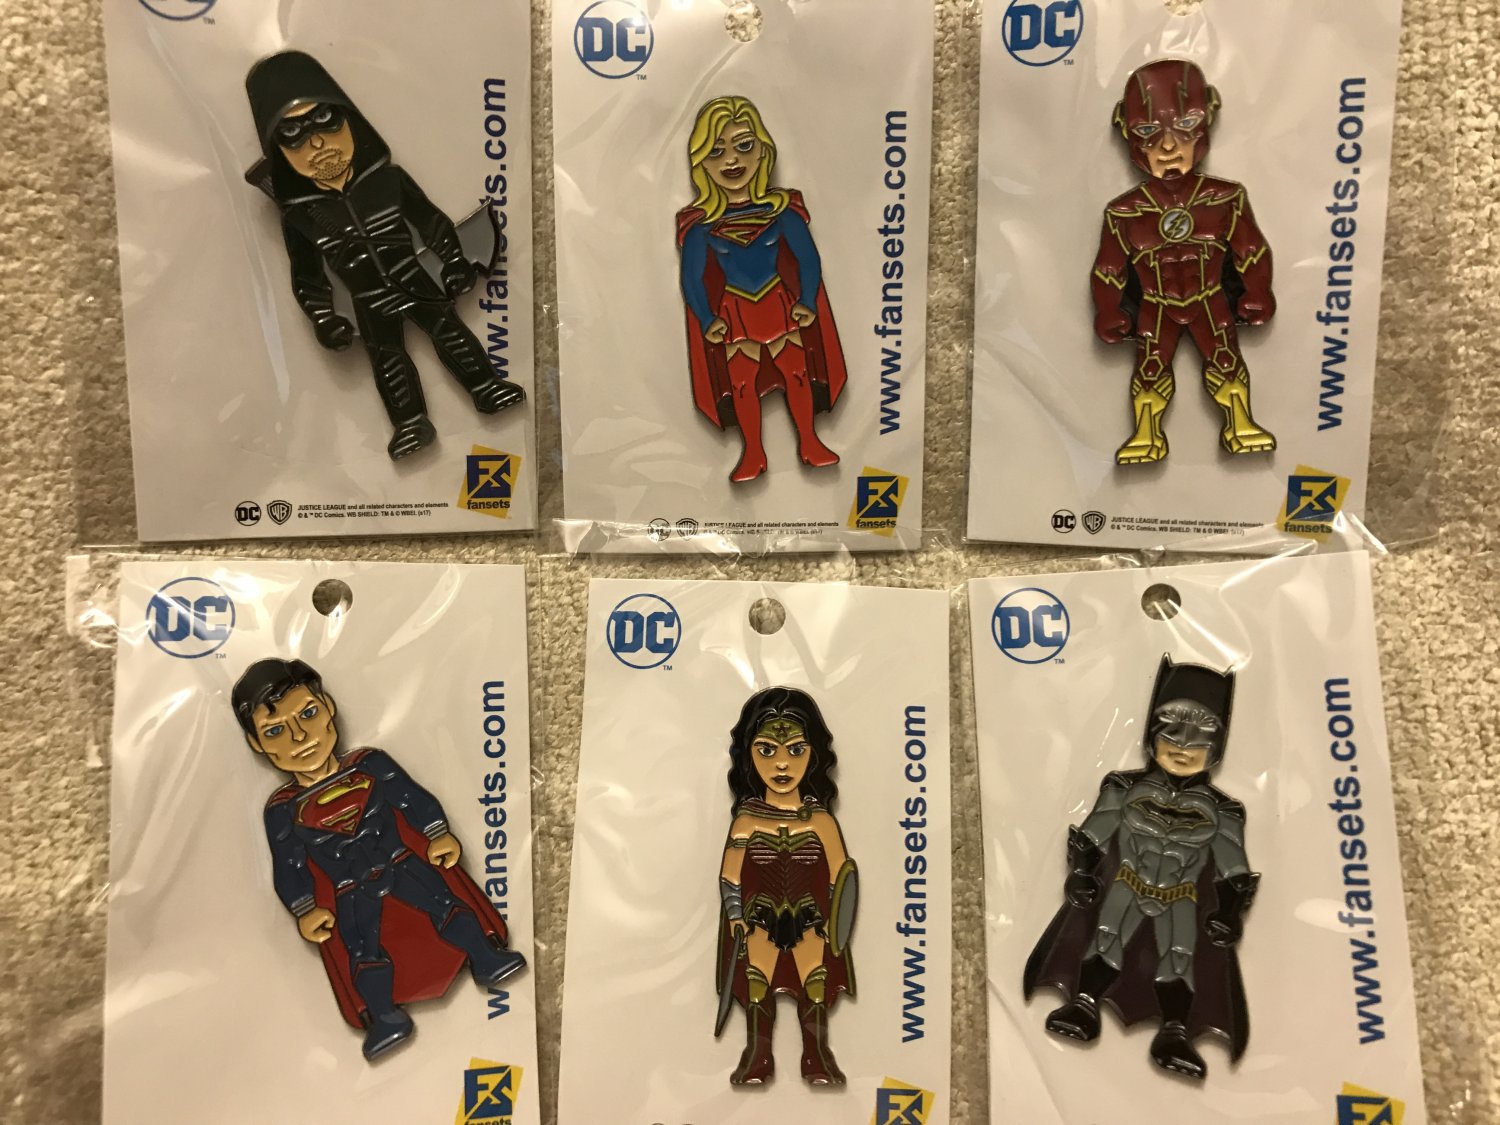 SDCC 2017 Exclusive DC Justice League Pin Complete Set (All 6)